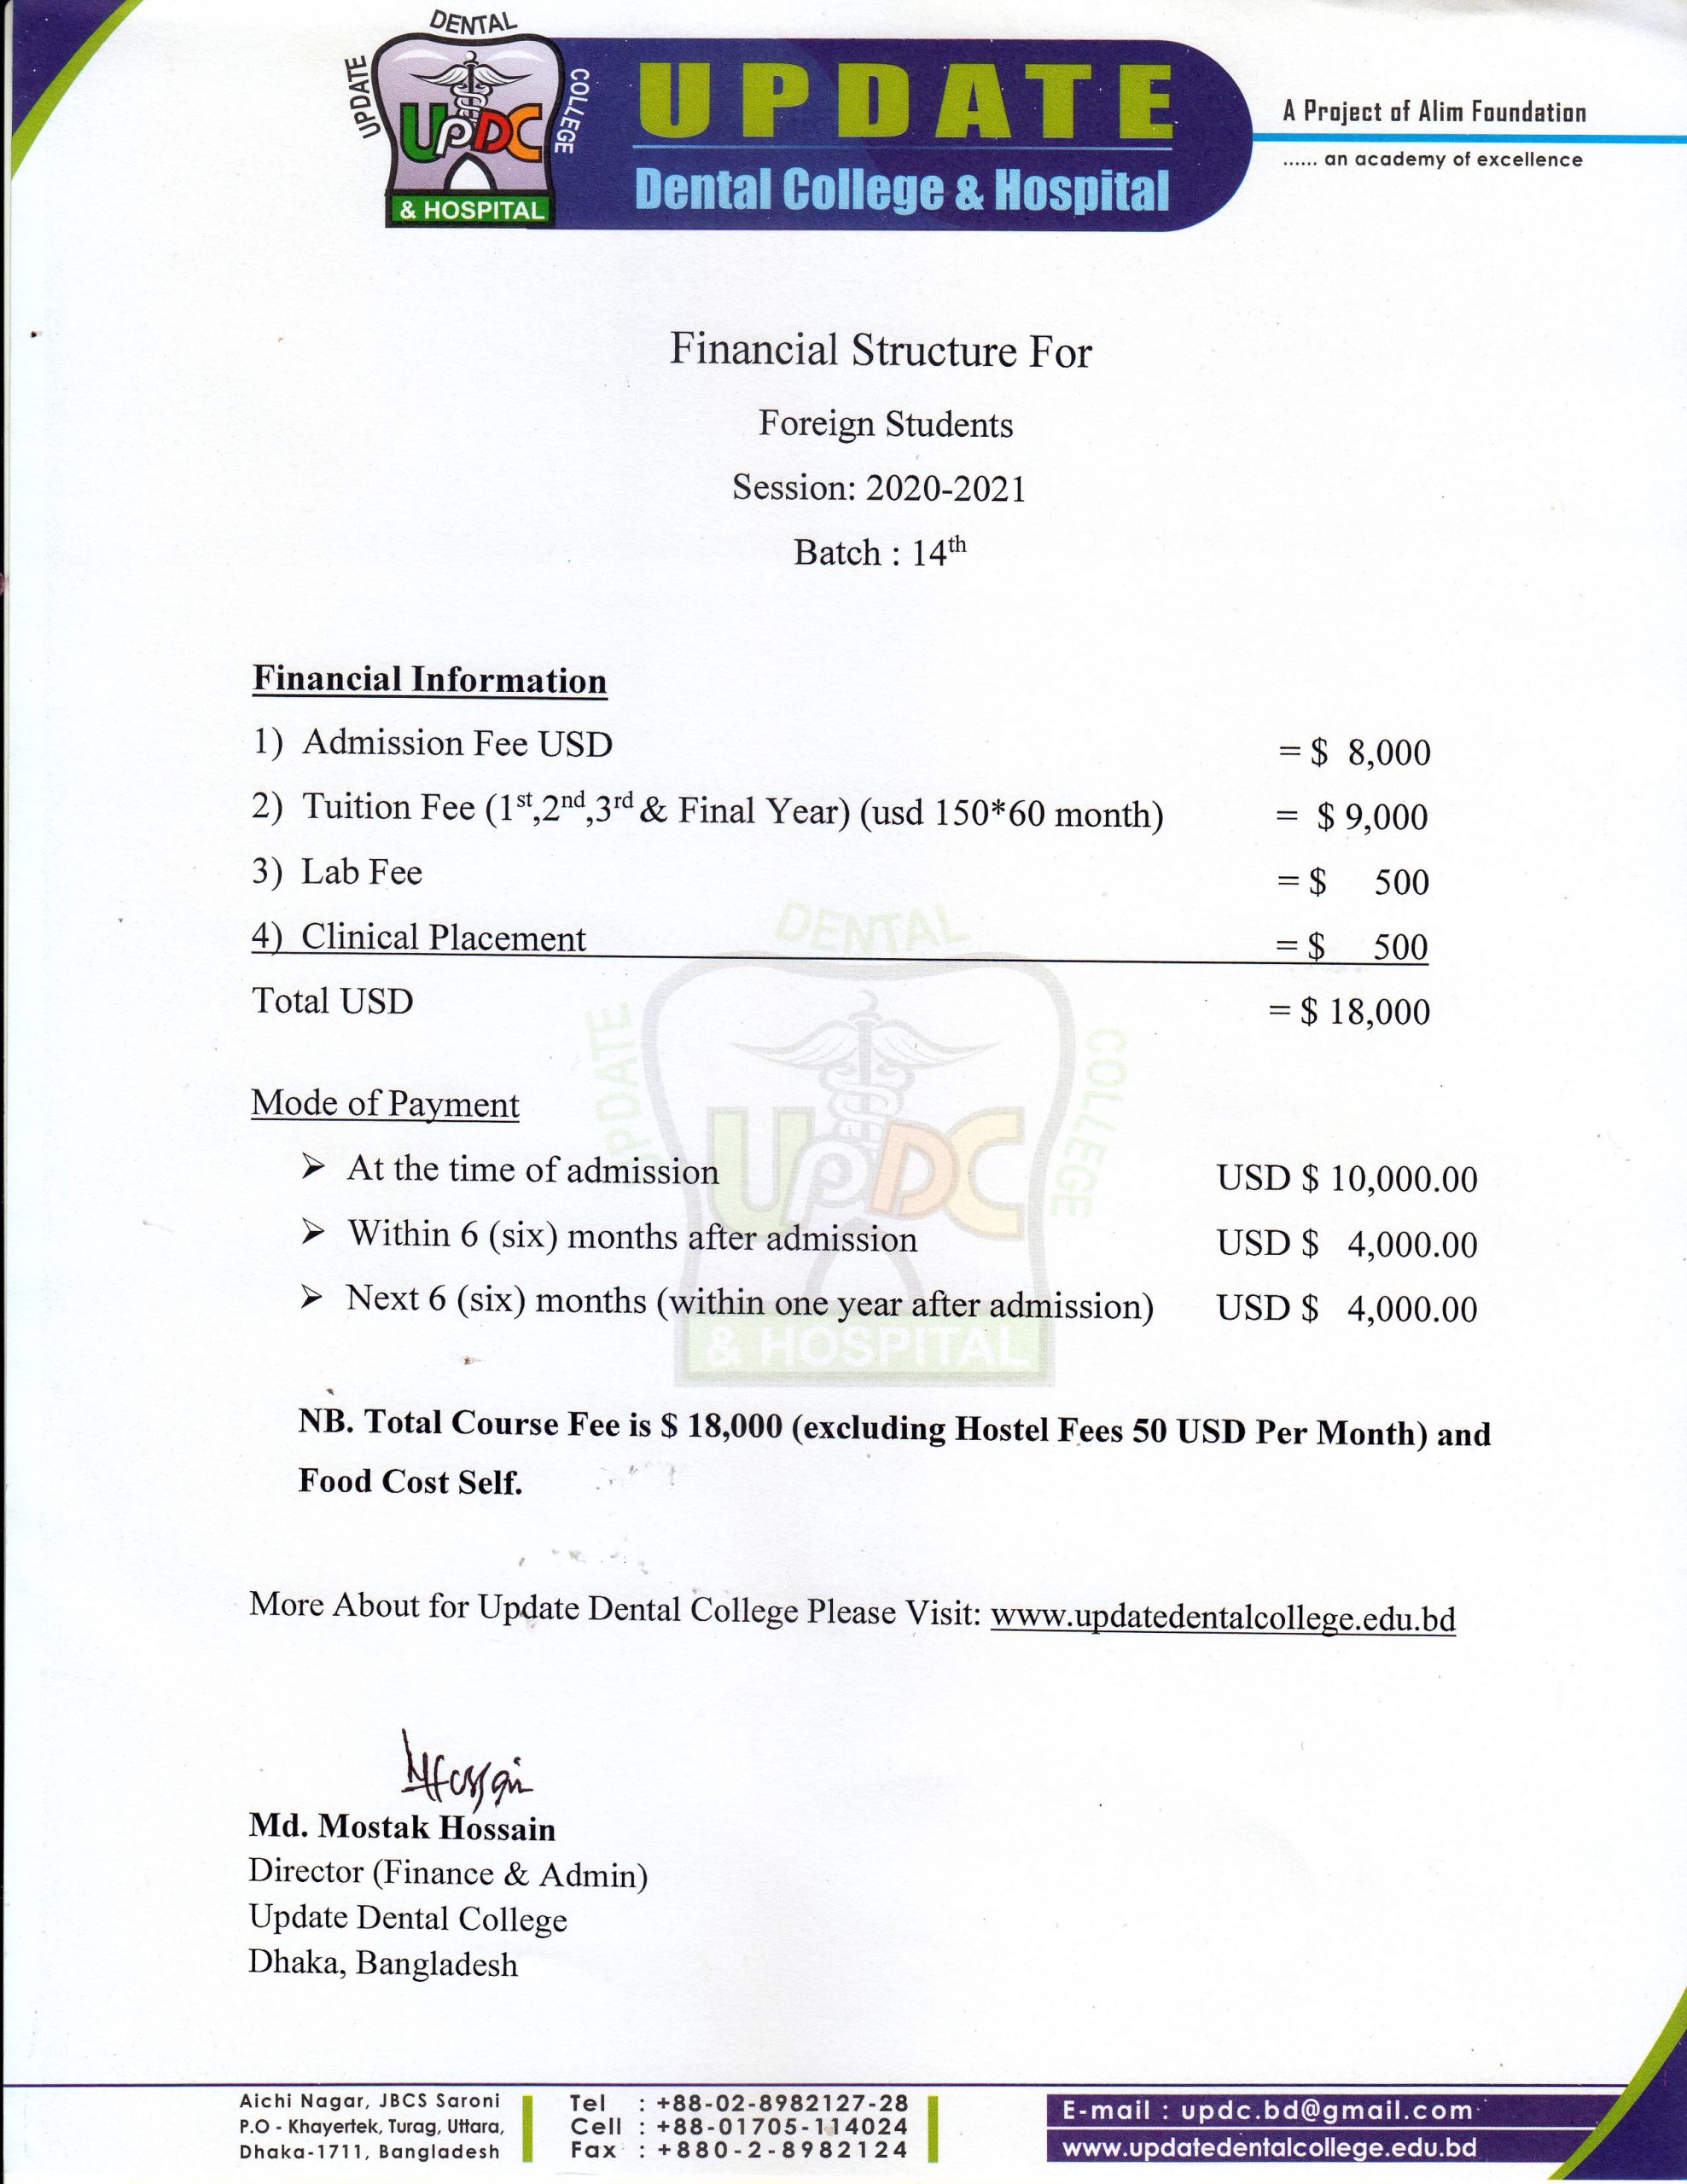 Financial Structure for Foreign Student 1